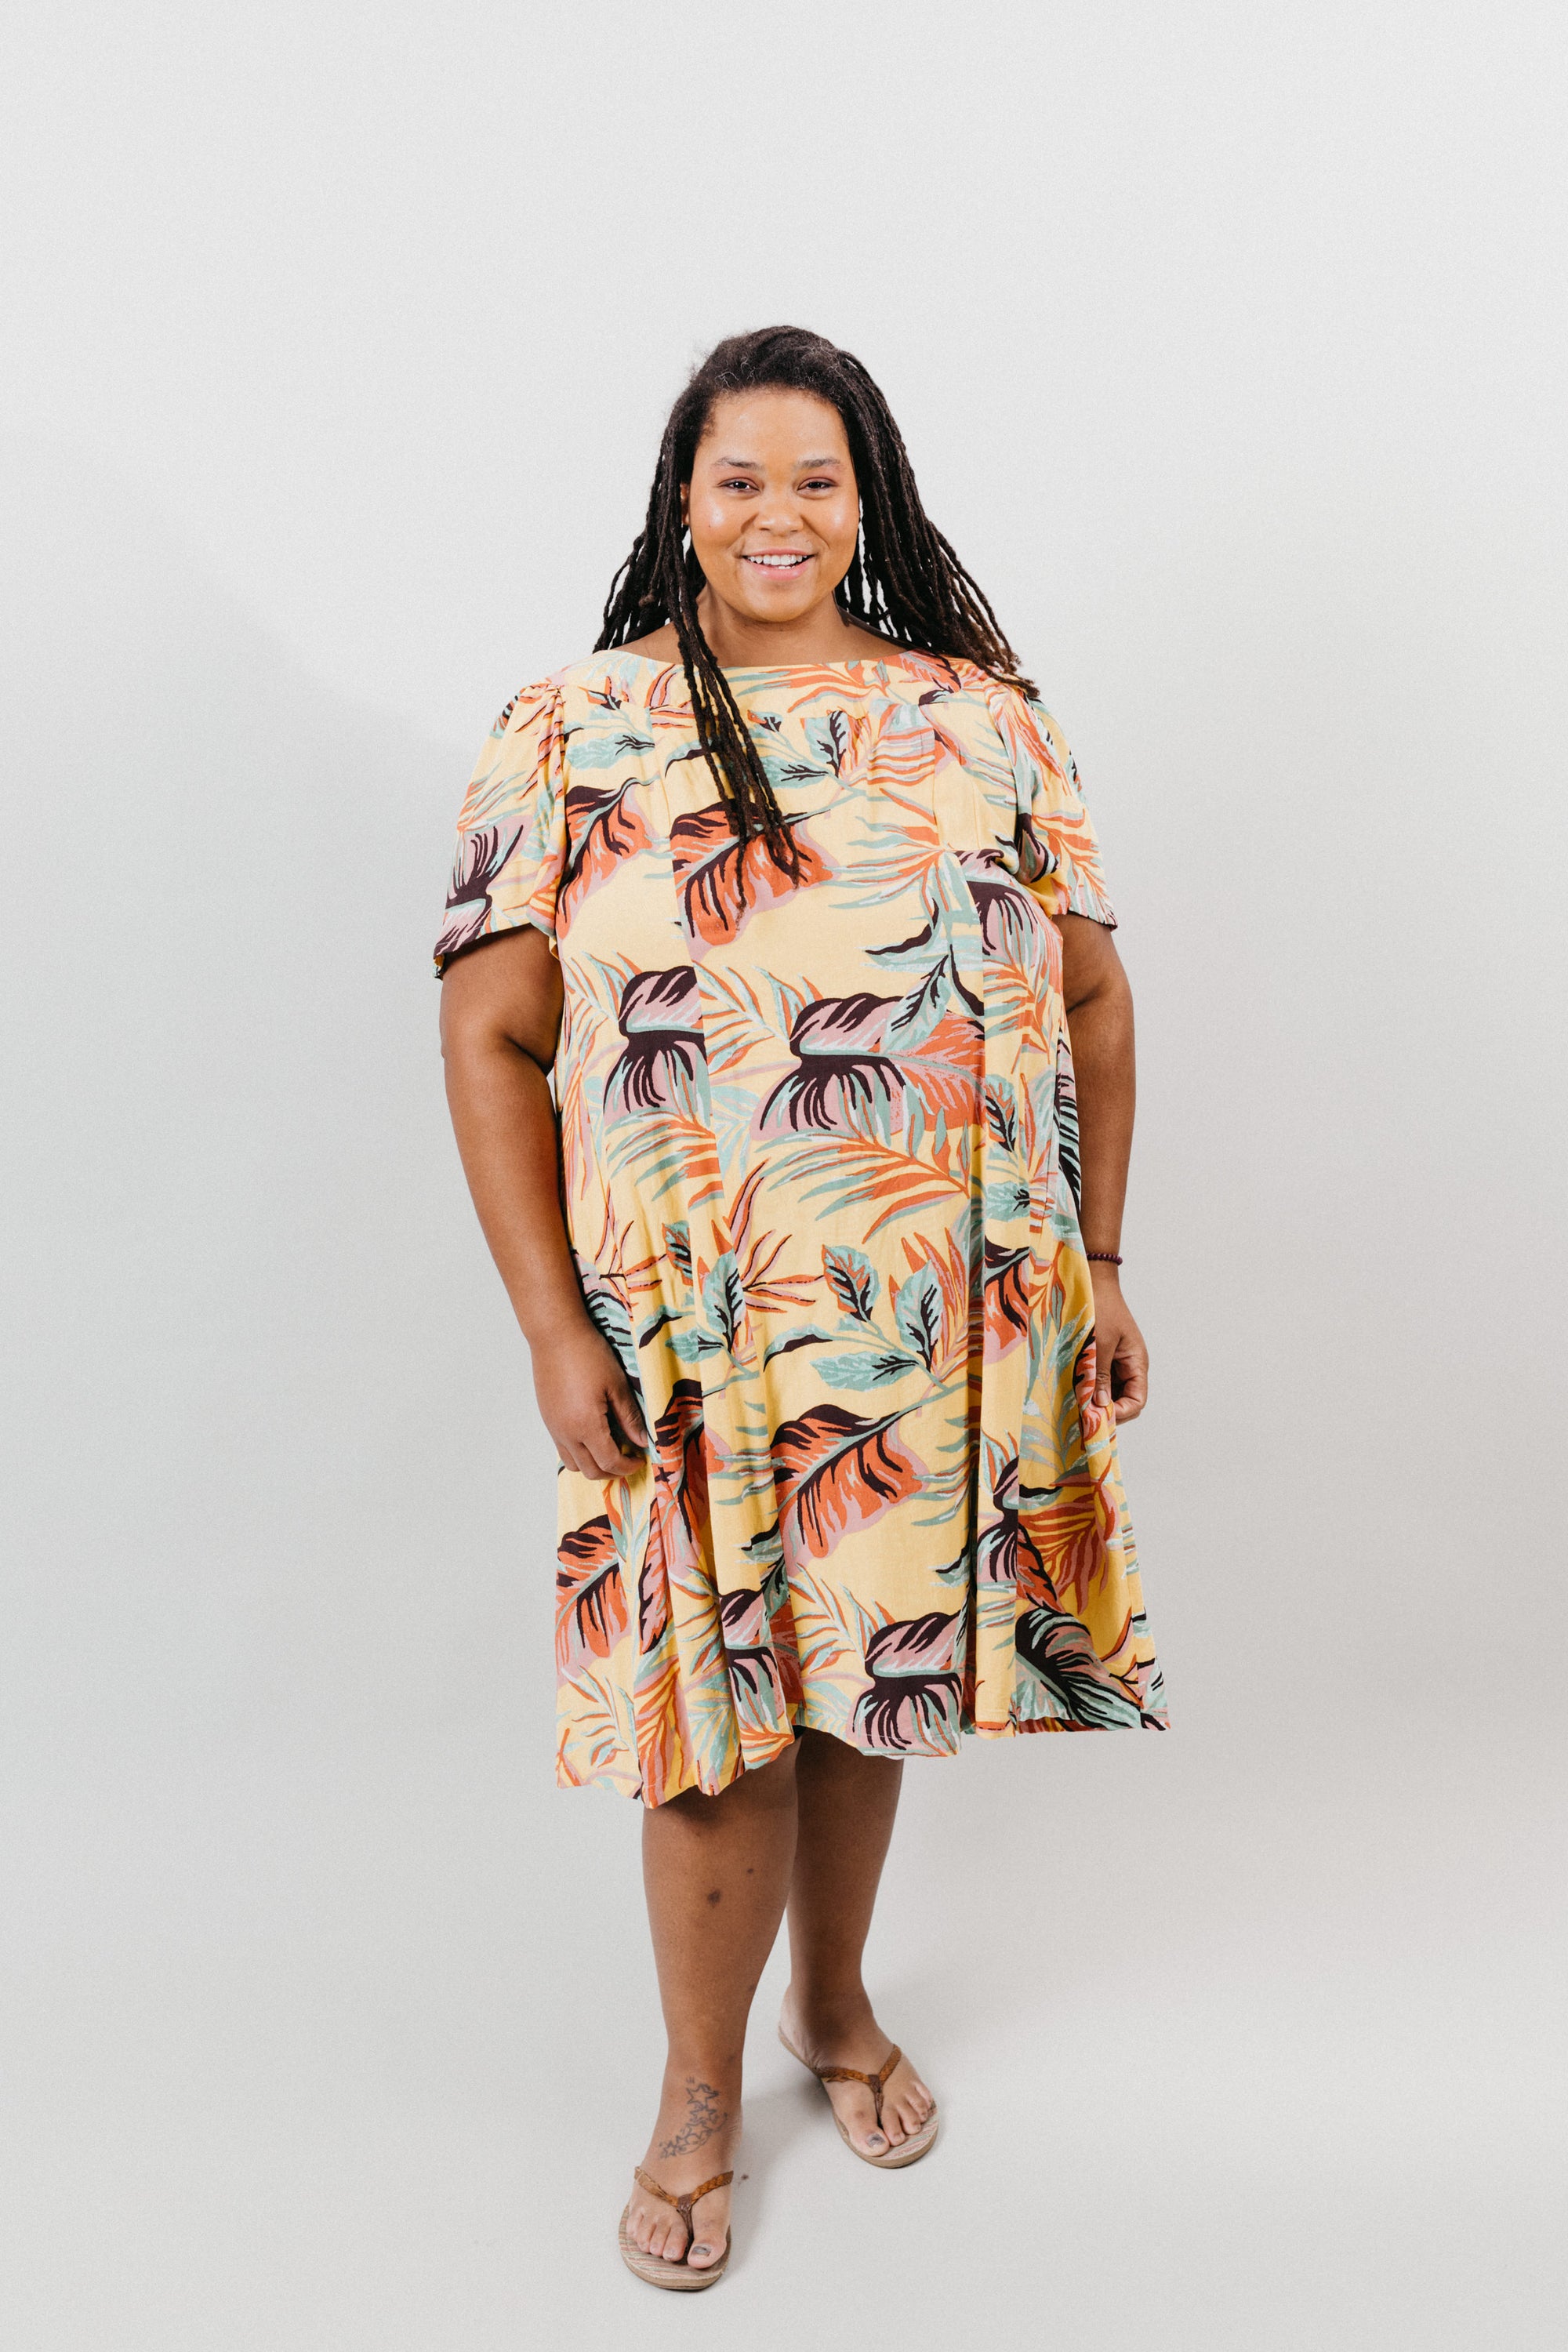 Black woman wearing a size 2XL knee-length, short-sleeve, yellow muumuu with orange and green palm fronds on it.  